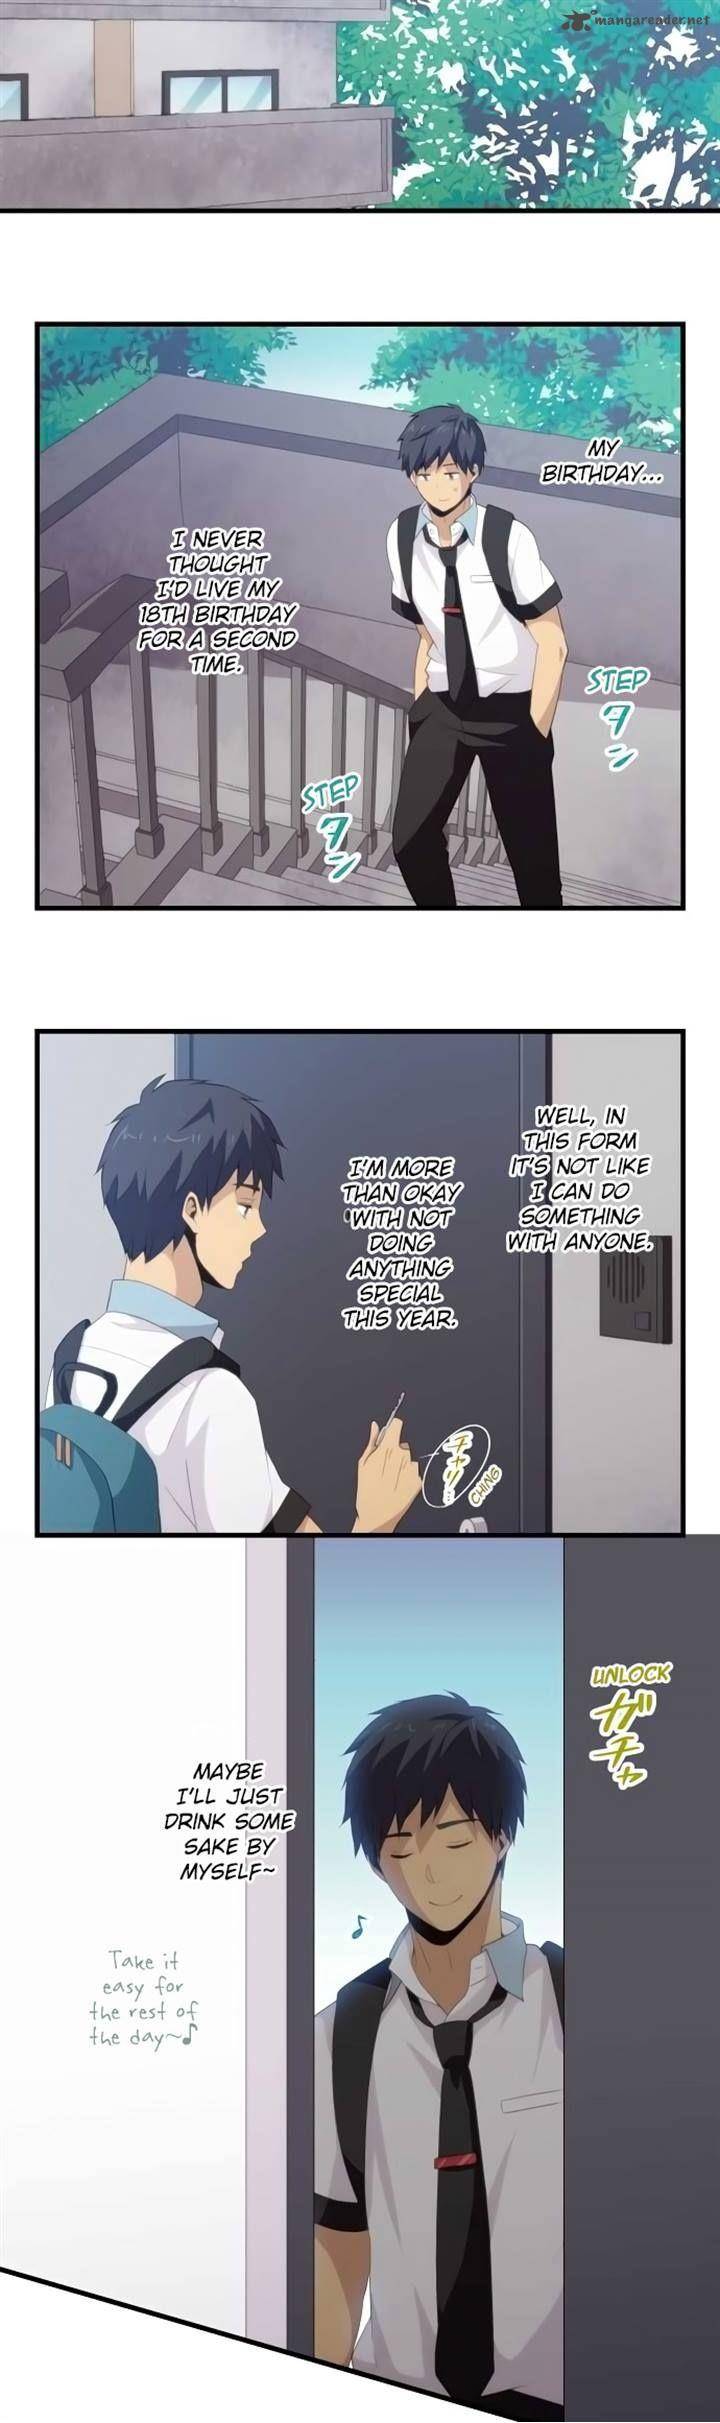 Relife 109 11